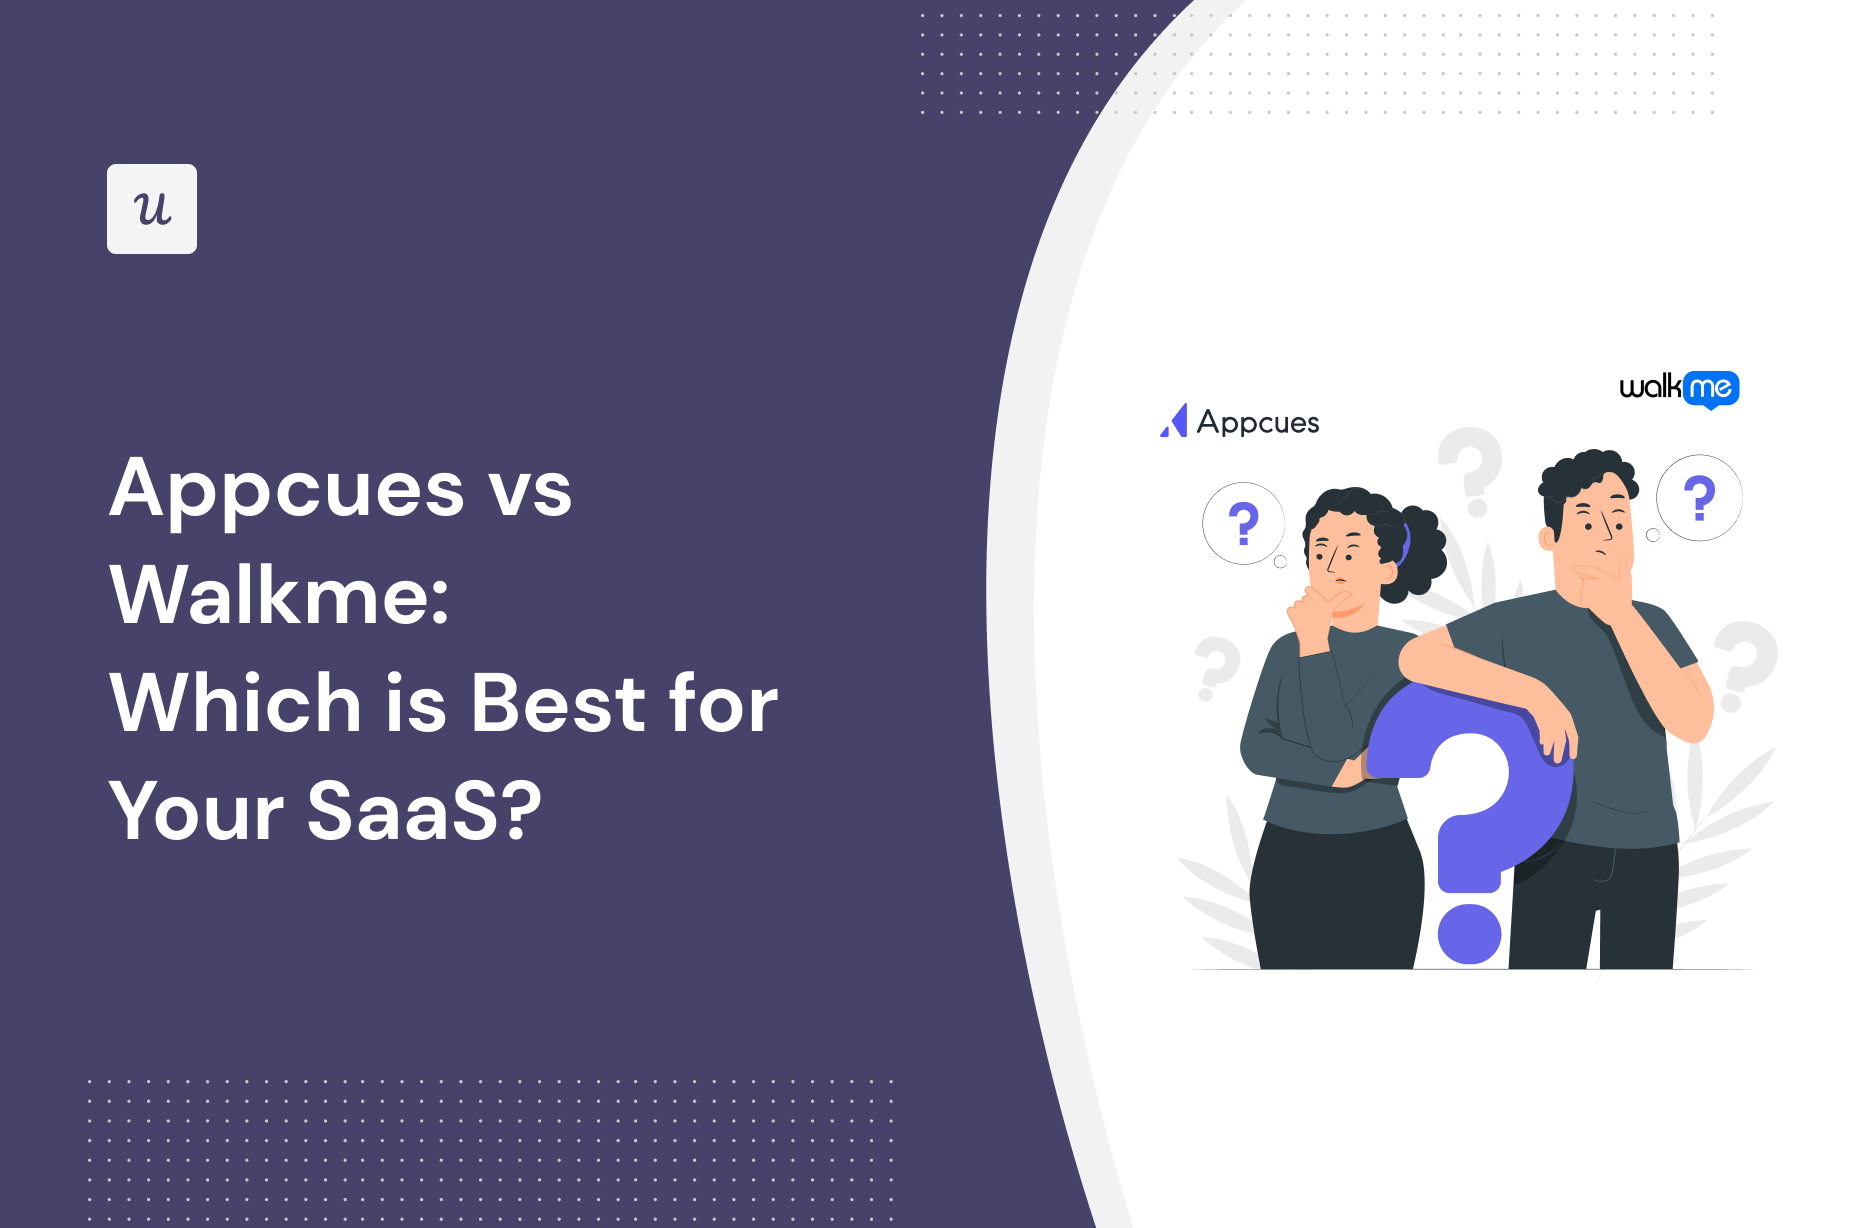 Appcues vs Walkme: Which is Best for Your SaaS?